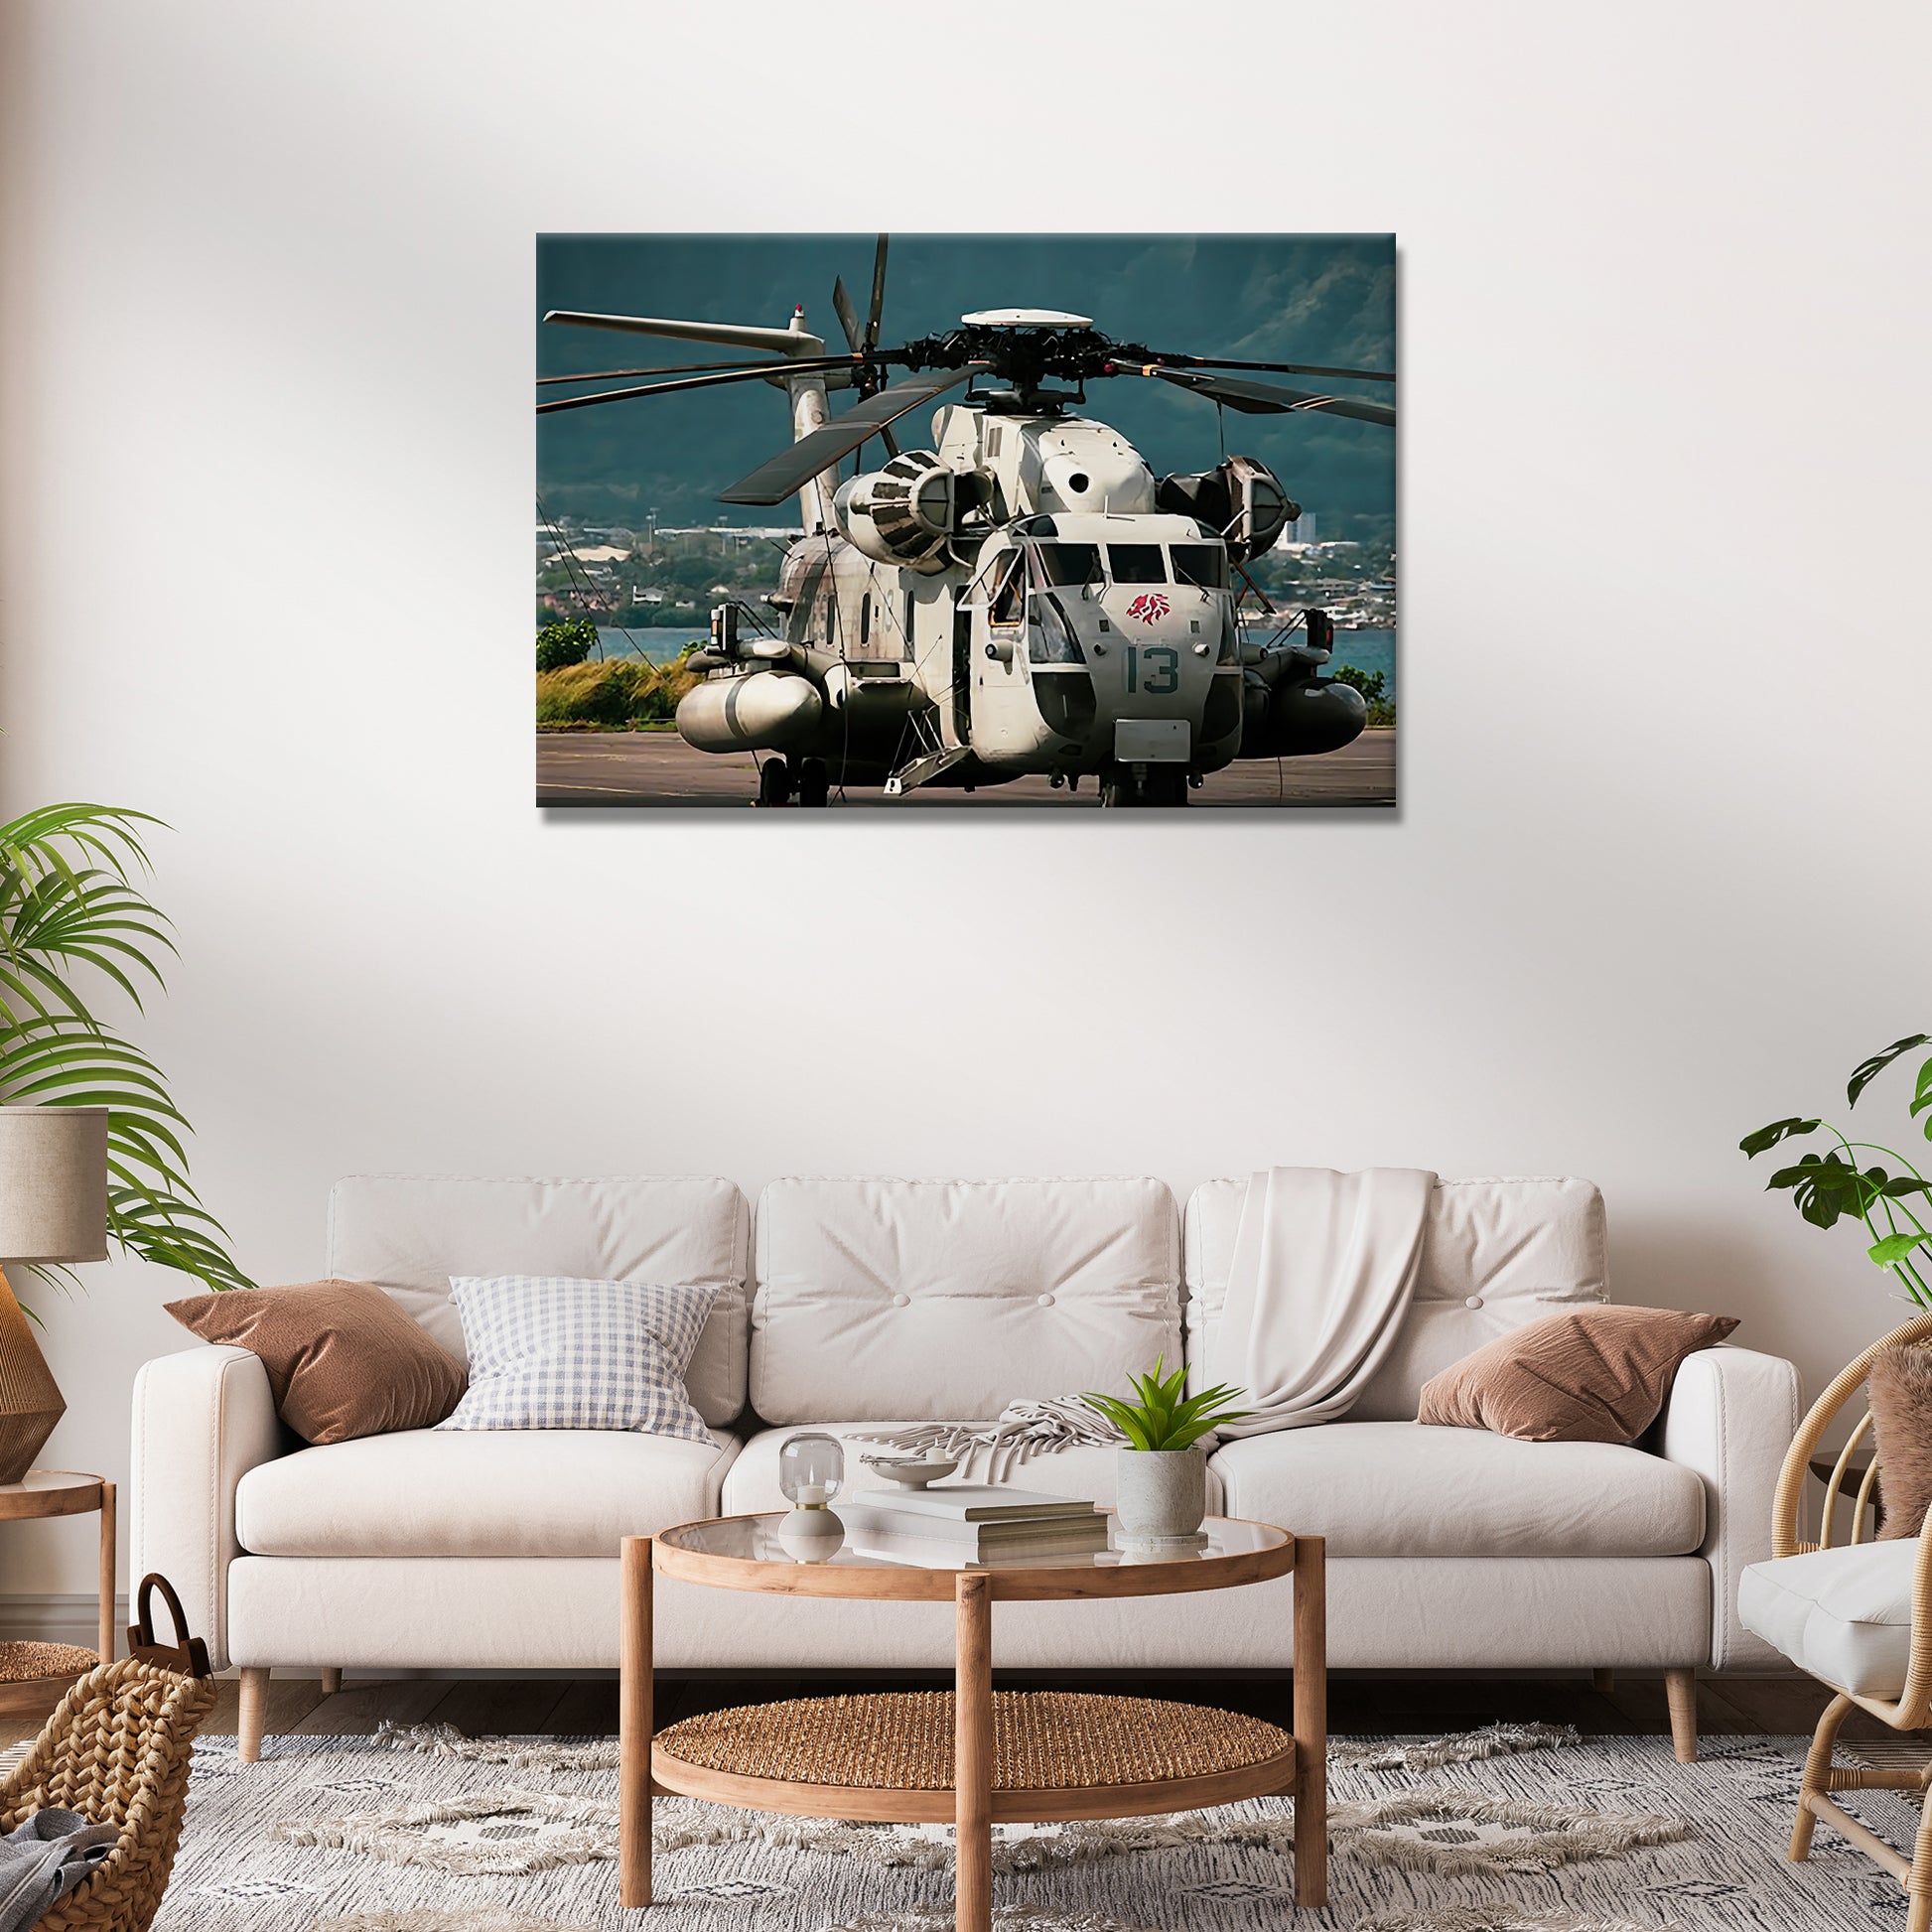 Helicopter Posterazzi A CH-53 Sea Stallion Canvas Wall Art  - Image by Tailored Canvases